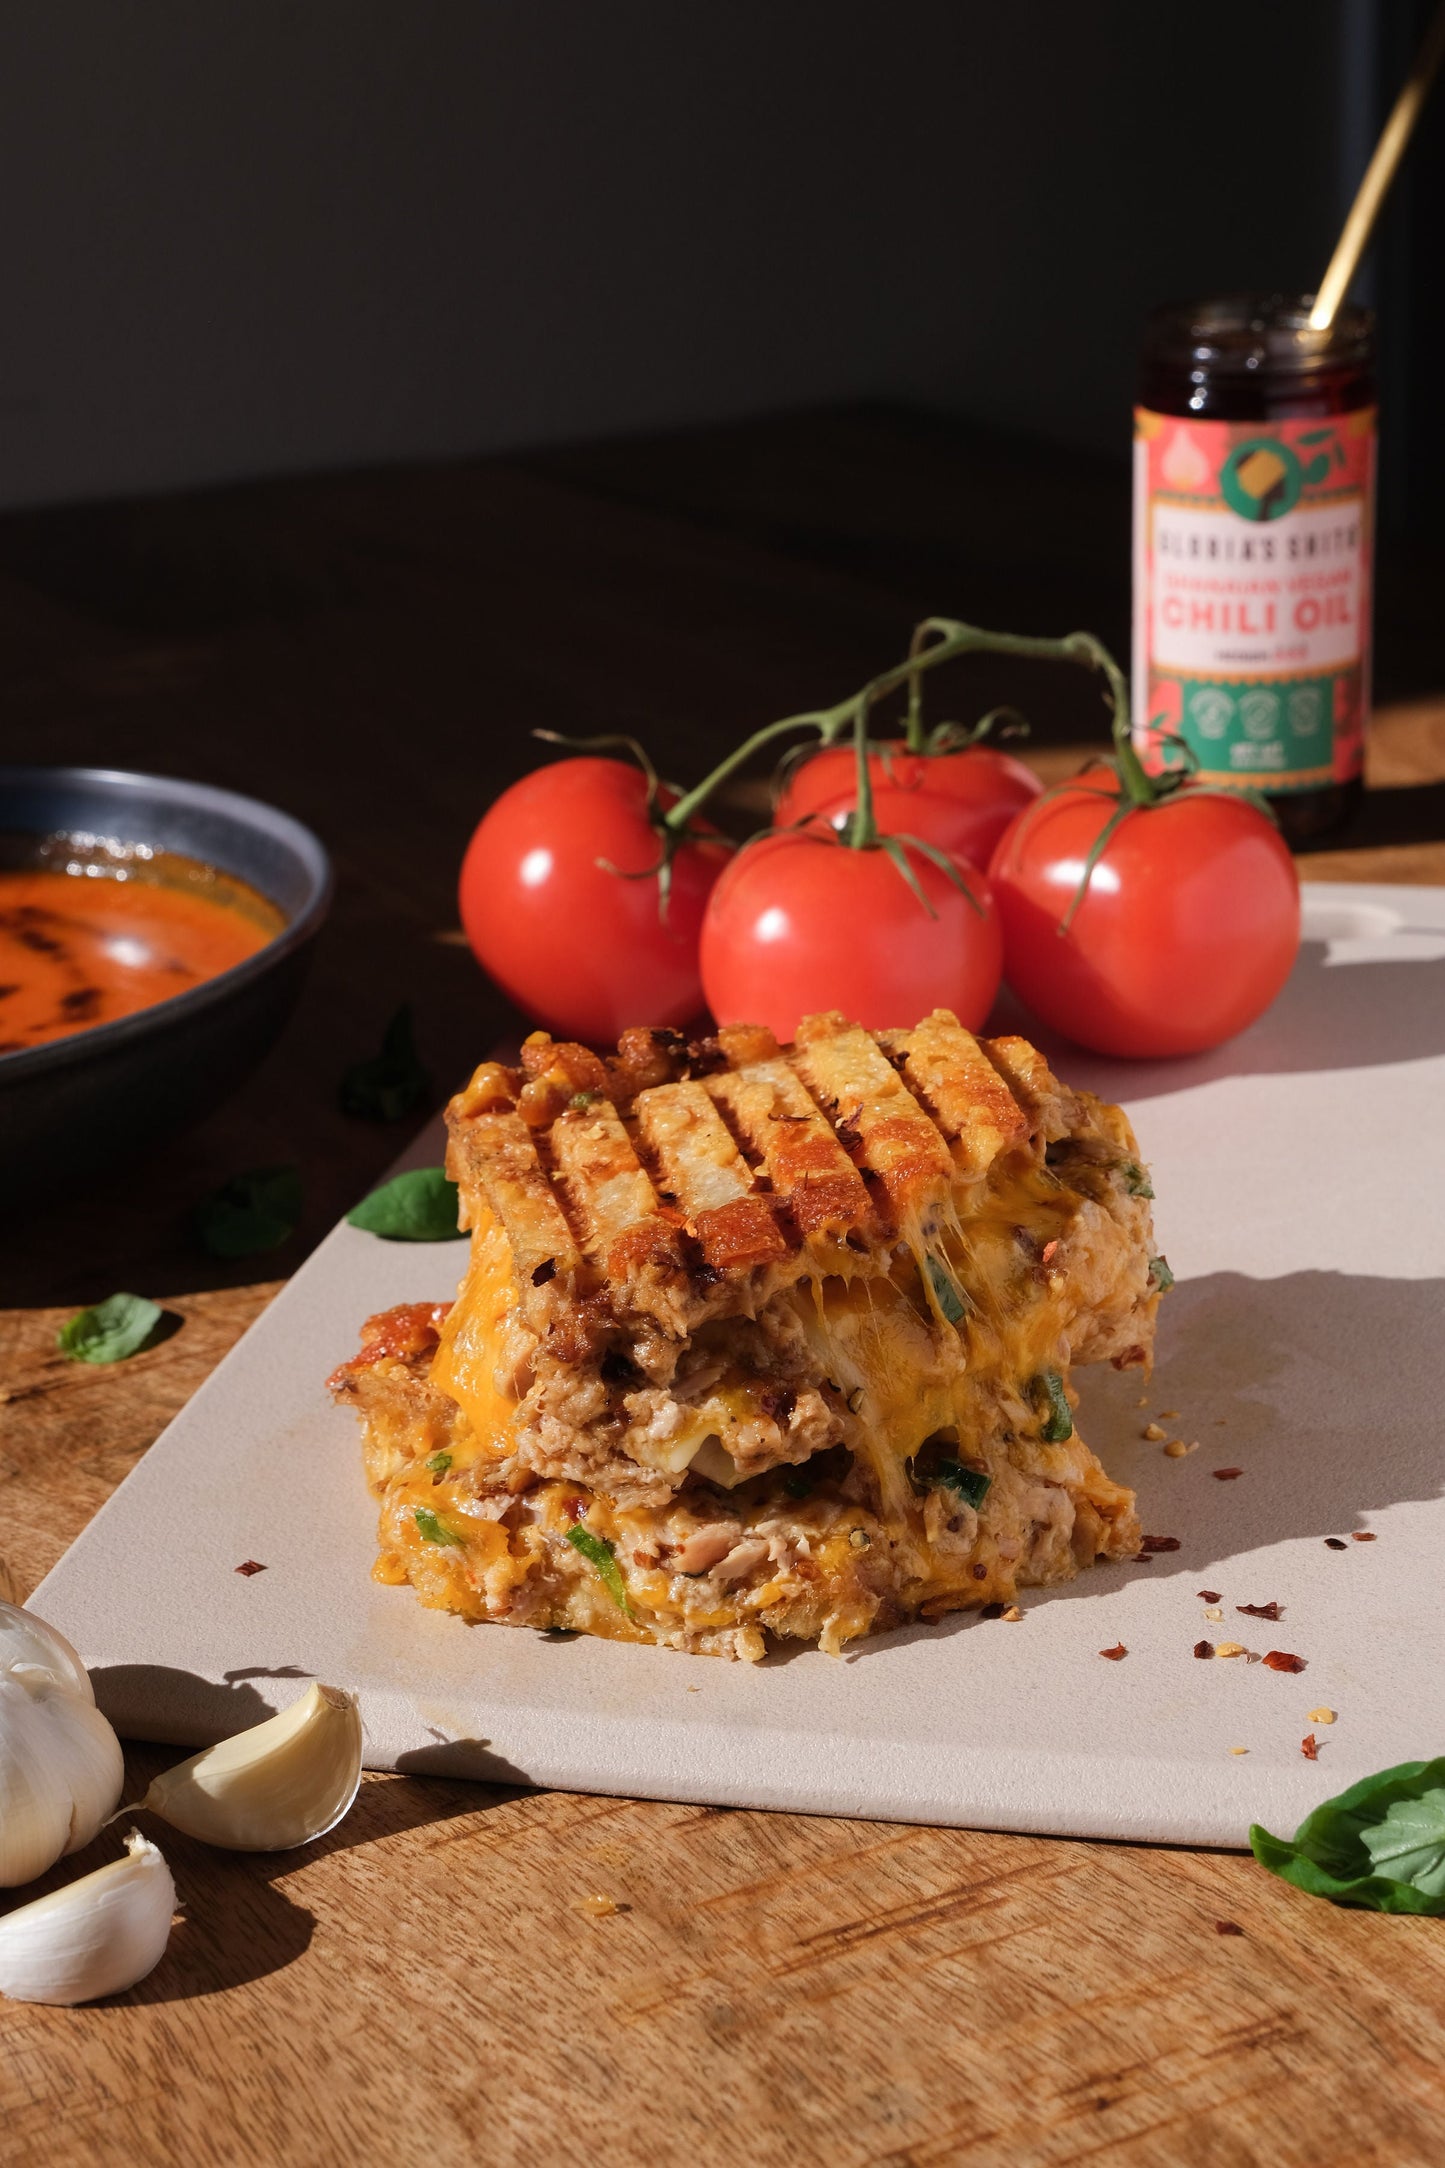 Image of Gloria's Shito Four Cheese Tuna Melt, a combination of melted cheese and tuna infused with Gloria's Shito sauce. Spicy vegan hot sauce, Ghanaian chili oil